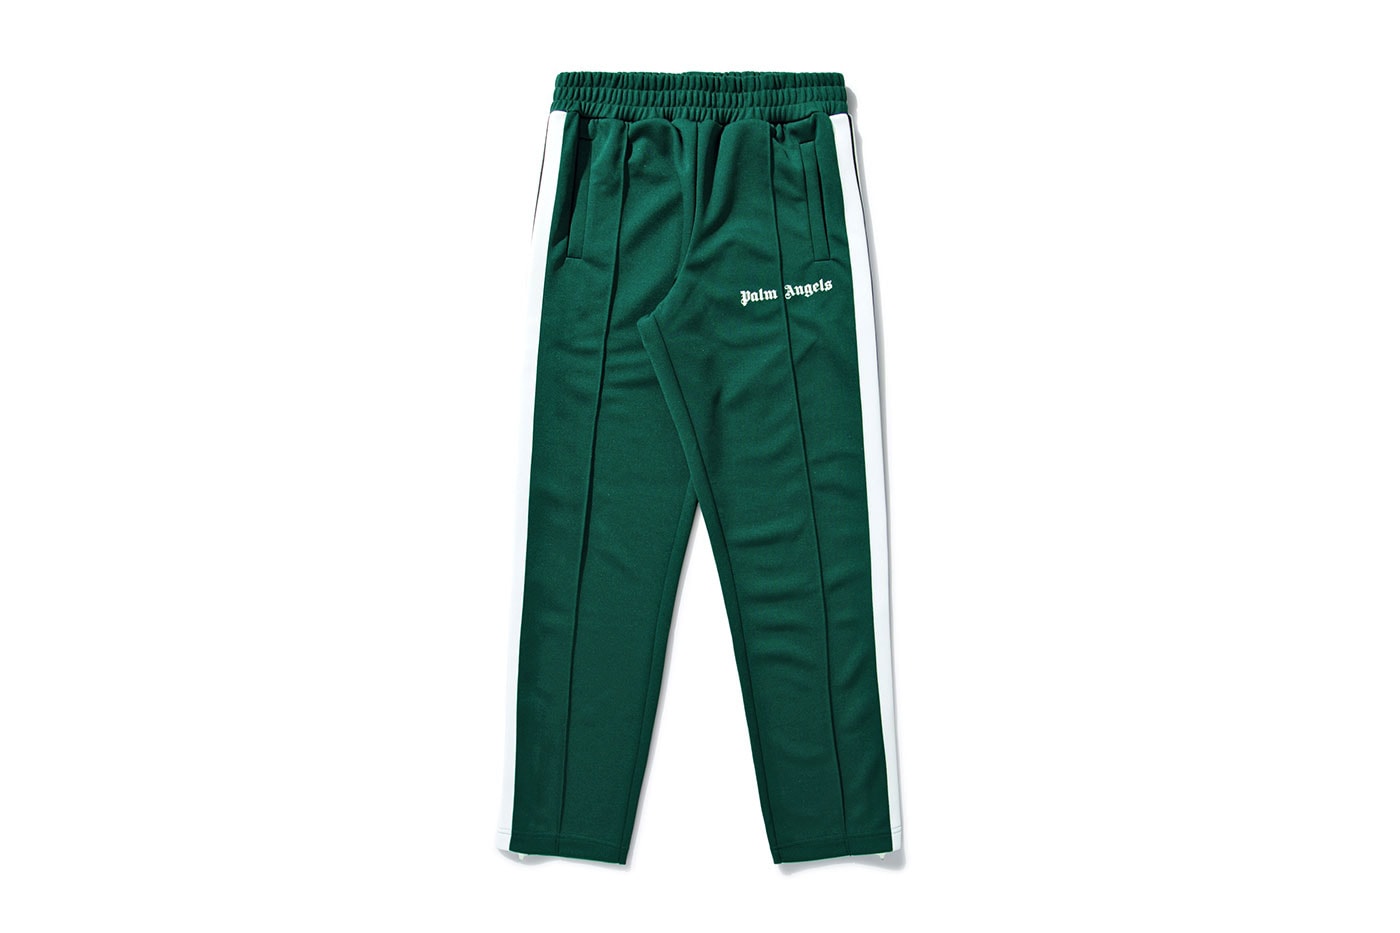 PALM ANGELS TRACKSUIT IN GREEN - Iconic Designer Menswear